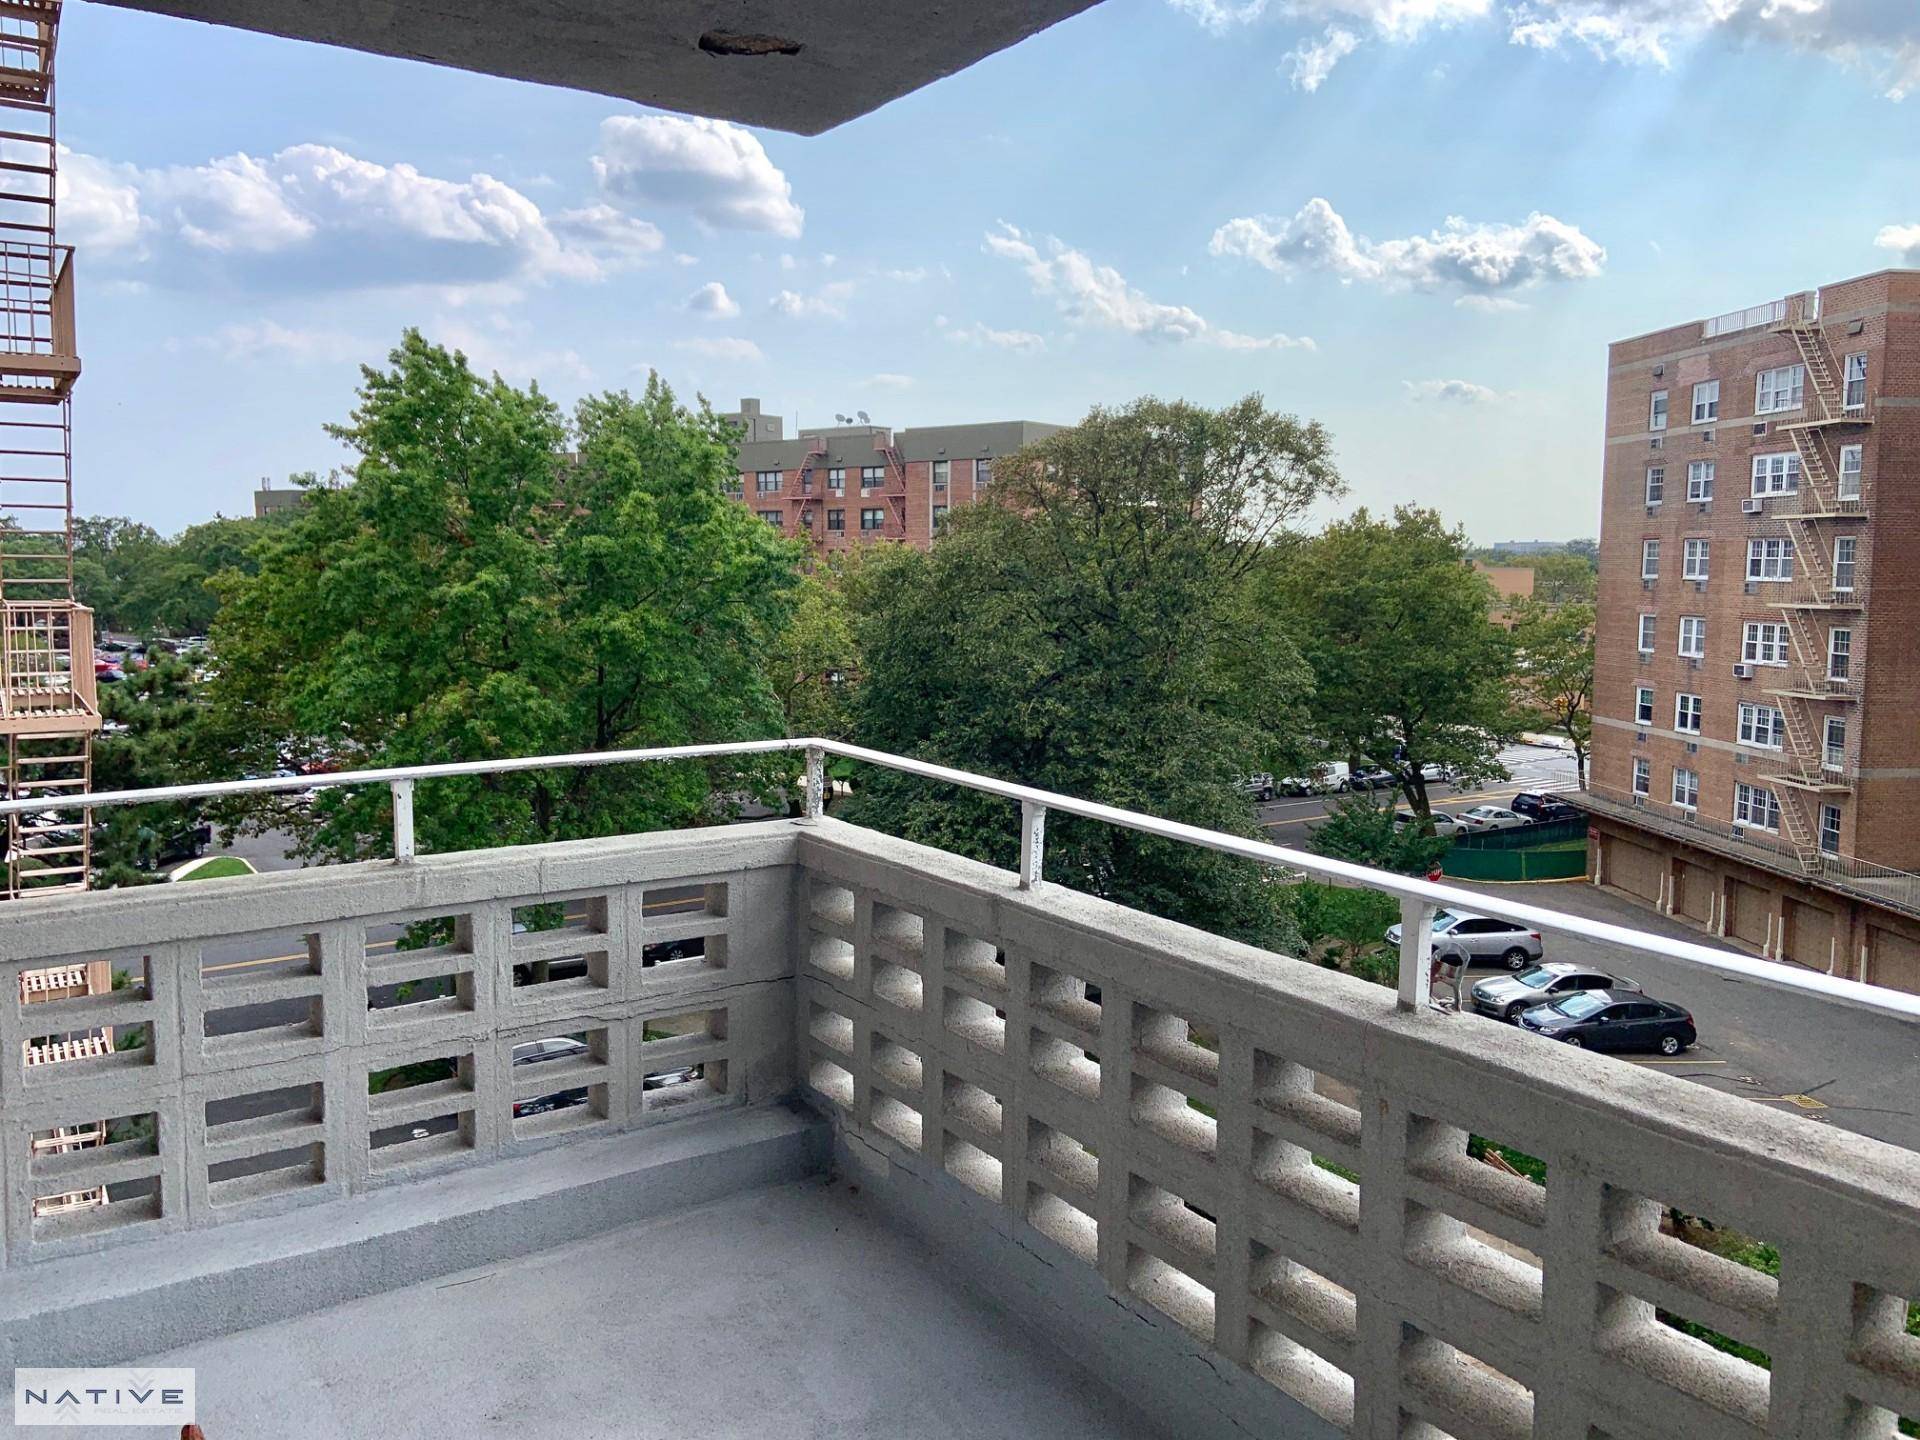 Native Real Estate is pleased to present this 2 Bedroom 2 Bathroom with private balcony Co Op in Howard Beach !